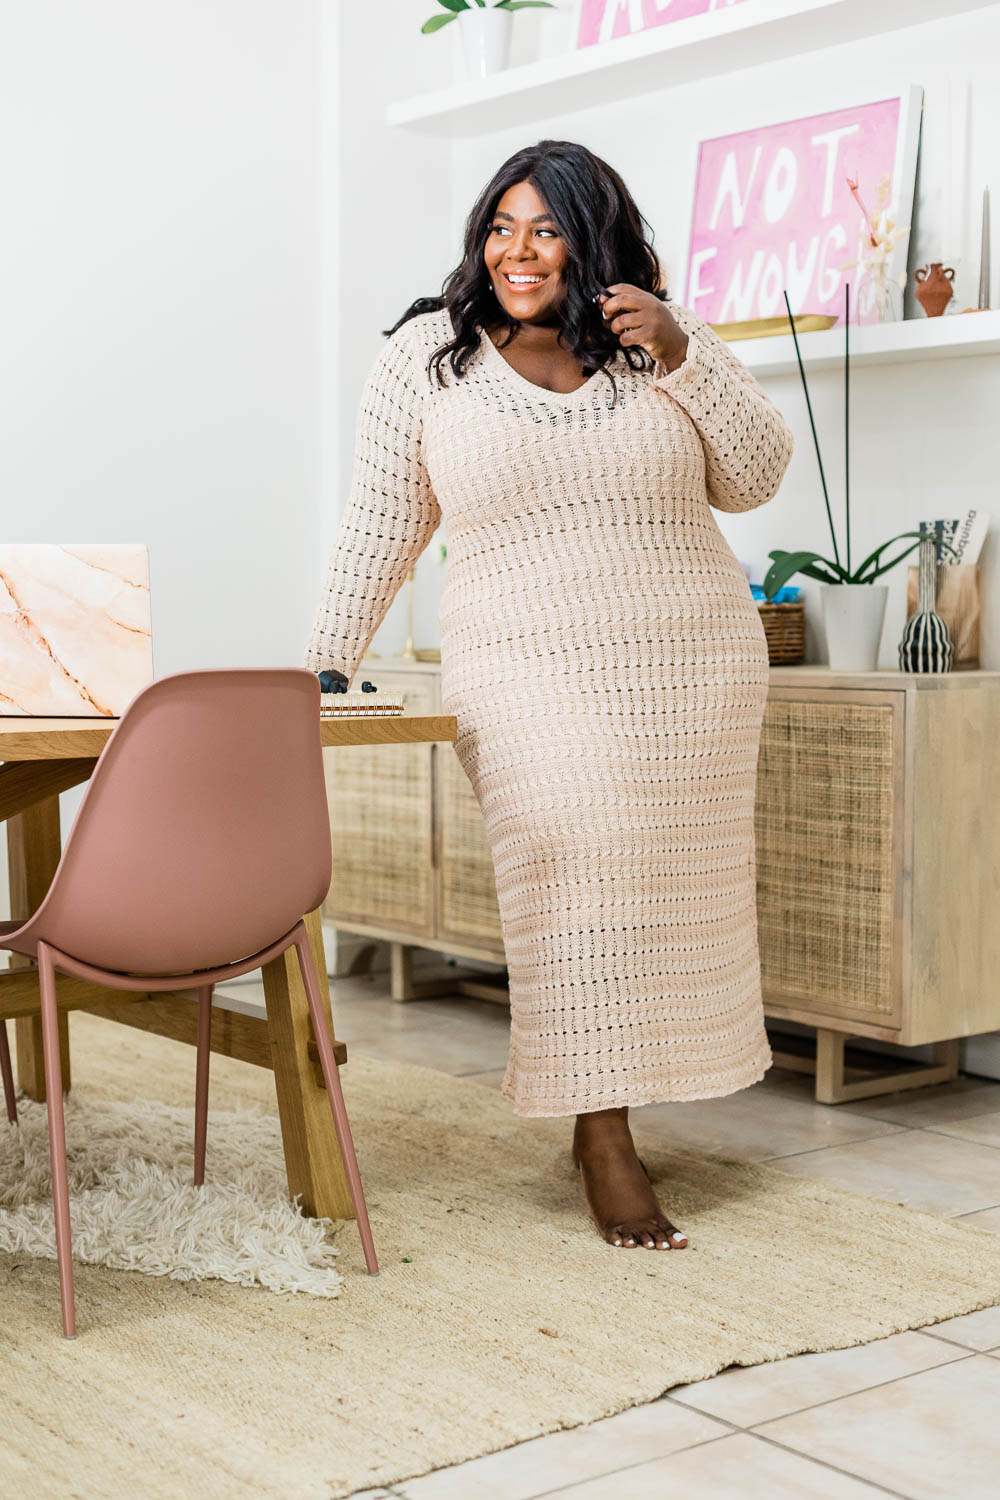 Nordstrom, AFRM Crotchet Dress, Home Office Decor, Amazon Essentials, Content Creator Tools, Amazon Live, Thamarr Musings of a Curvy Lady, Amazon Influencer Essentials, Amazon Echo Buds